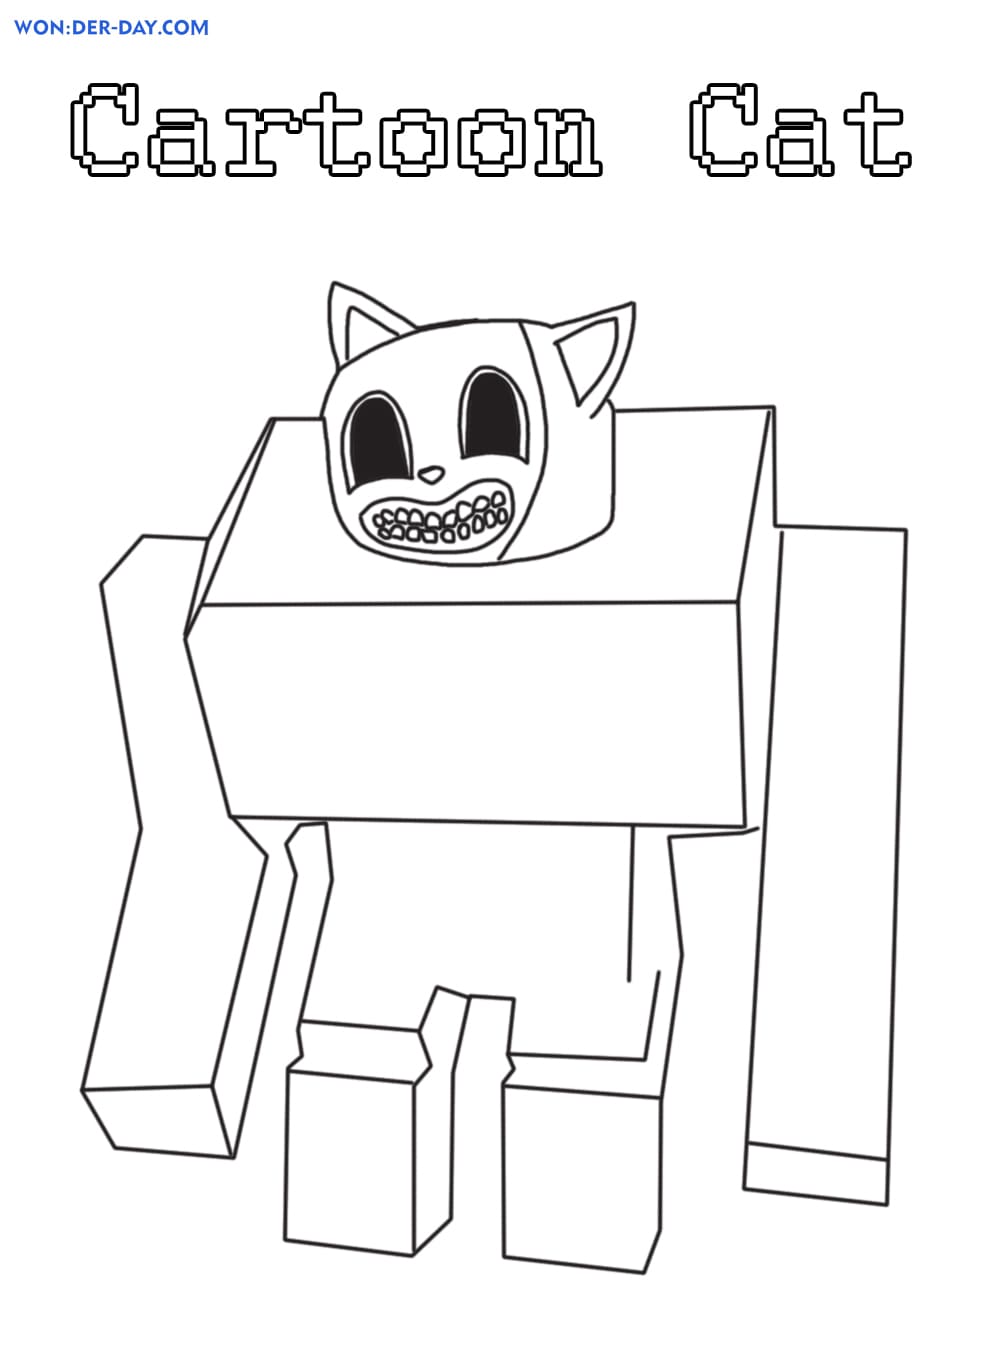 Minecraft Cat Coloring Page - 93+ File for DIY T-shirt, Mug, Decoration